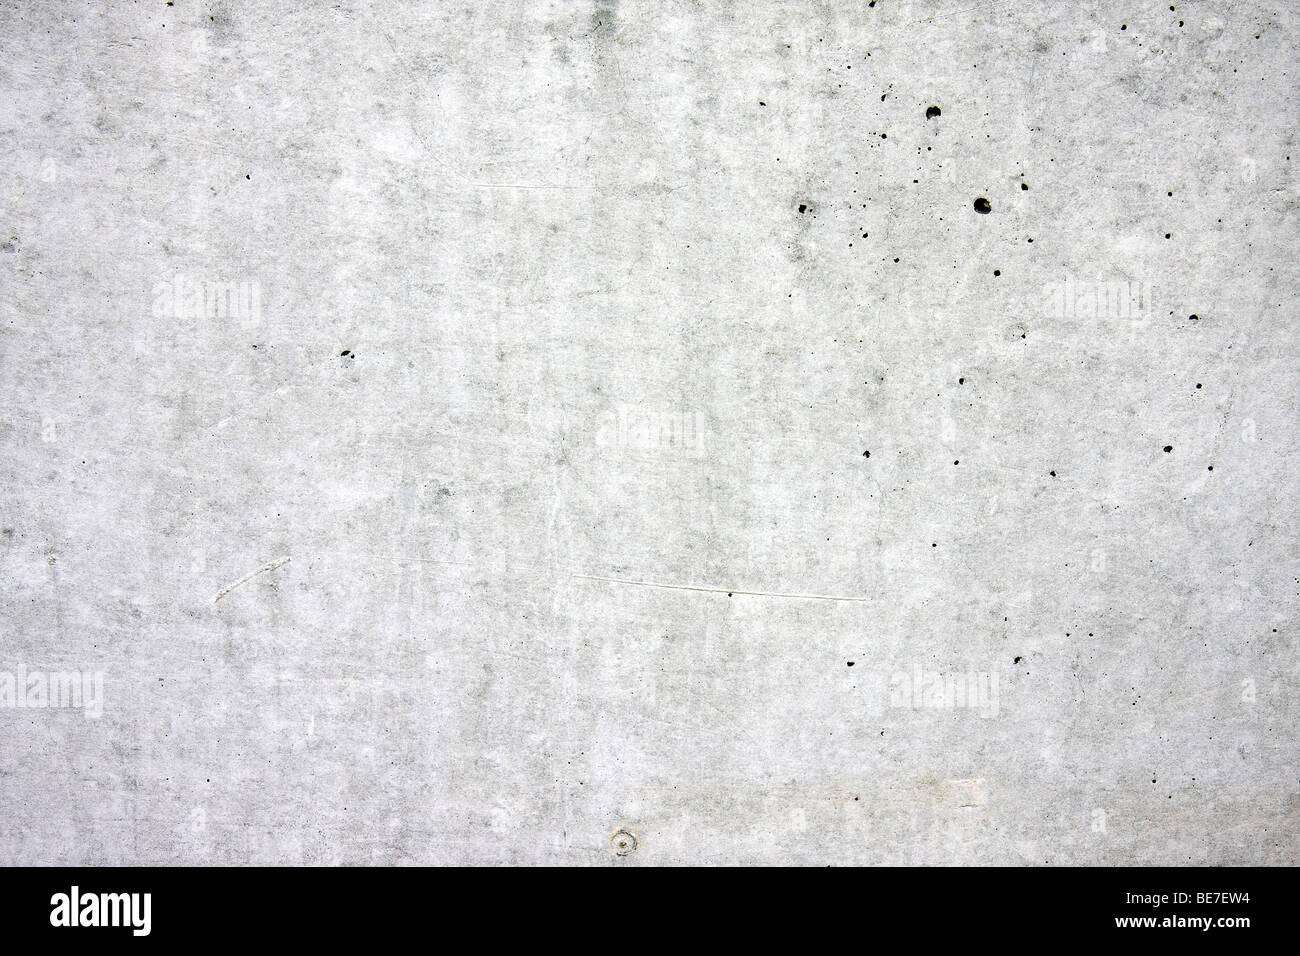 the old grunge concrete texture Stock Photo